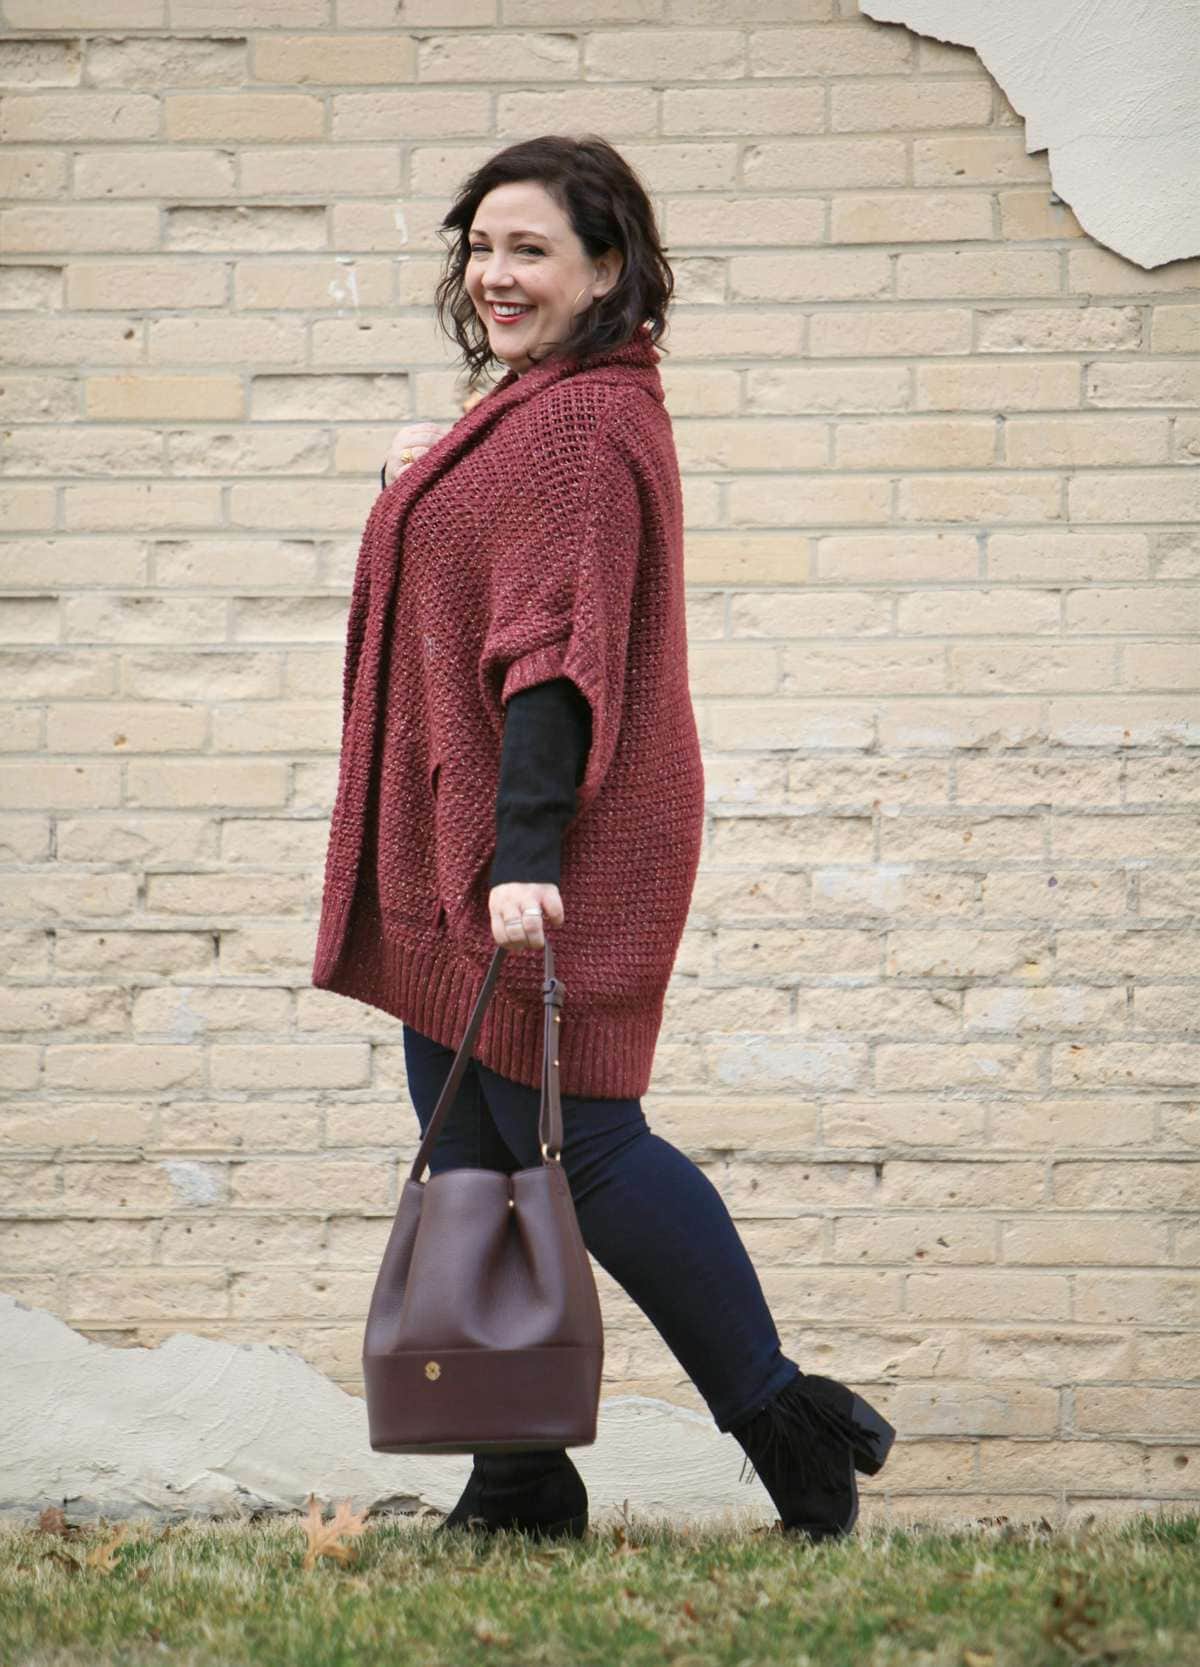 Wardrobe Oxygen,, over 40 blogger wearing a Melissa McCarthy Seven7 cardigan and Dagne Dover oxblood leather bucket bag